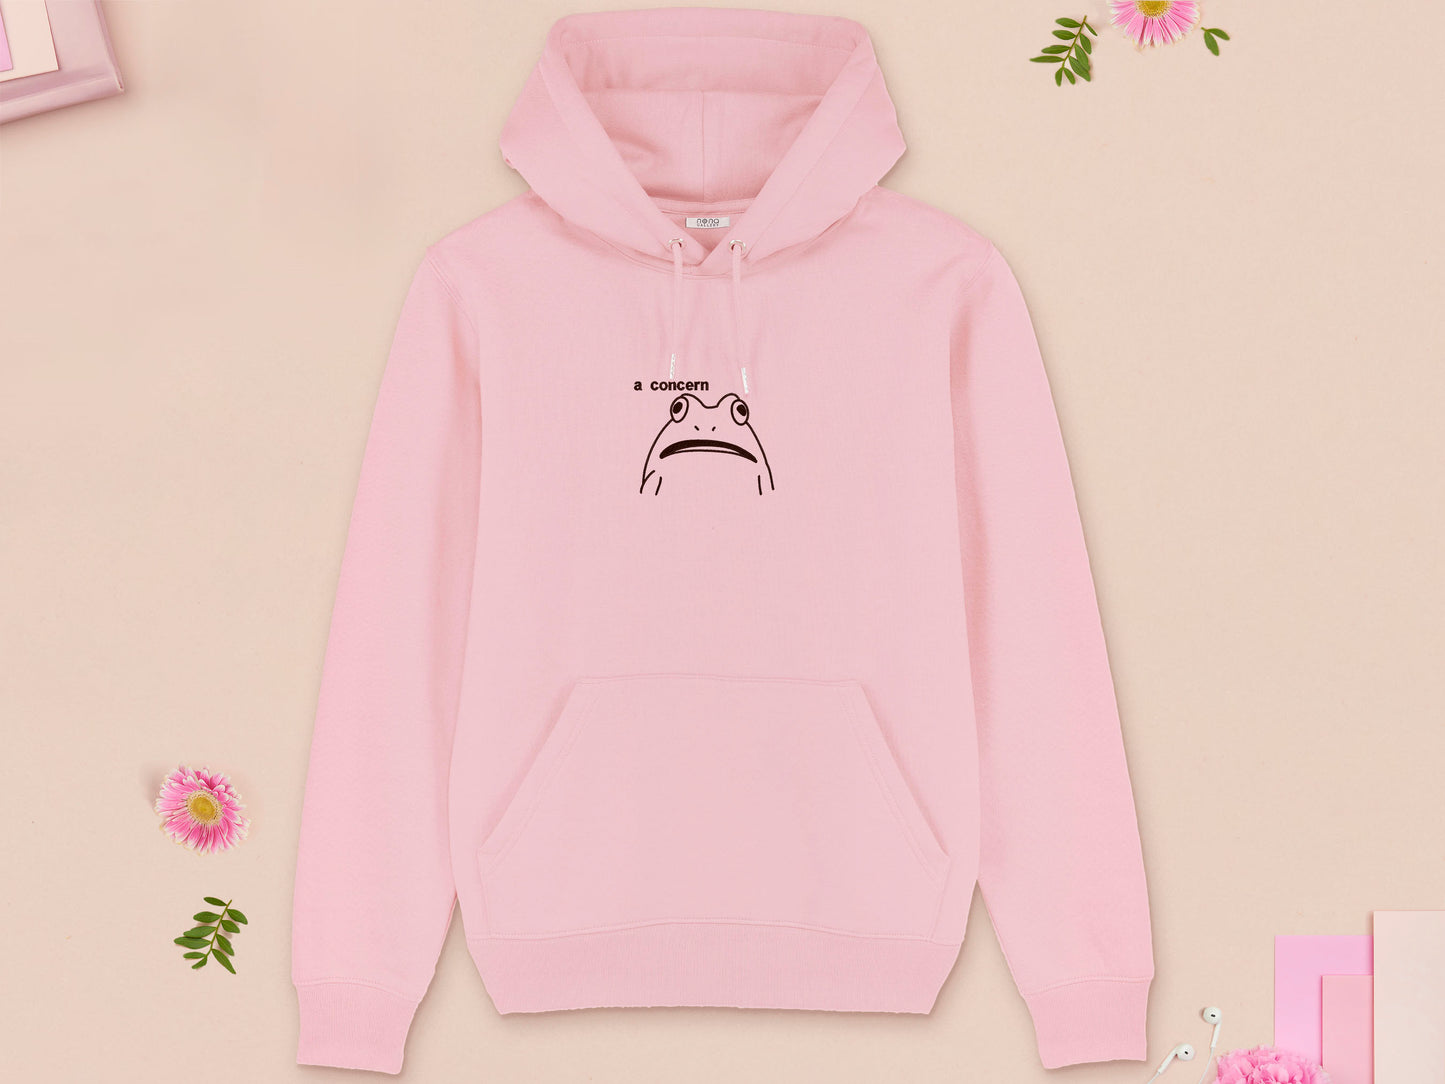 A pink long sleeve fleece hoodie, with an embroidered brown thread design of cute confused looking frog with the text a concern.